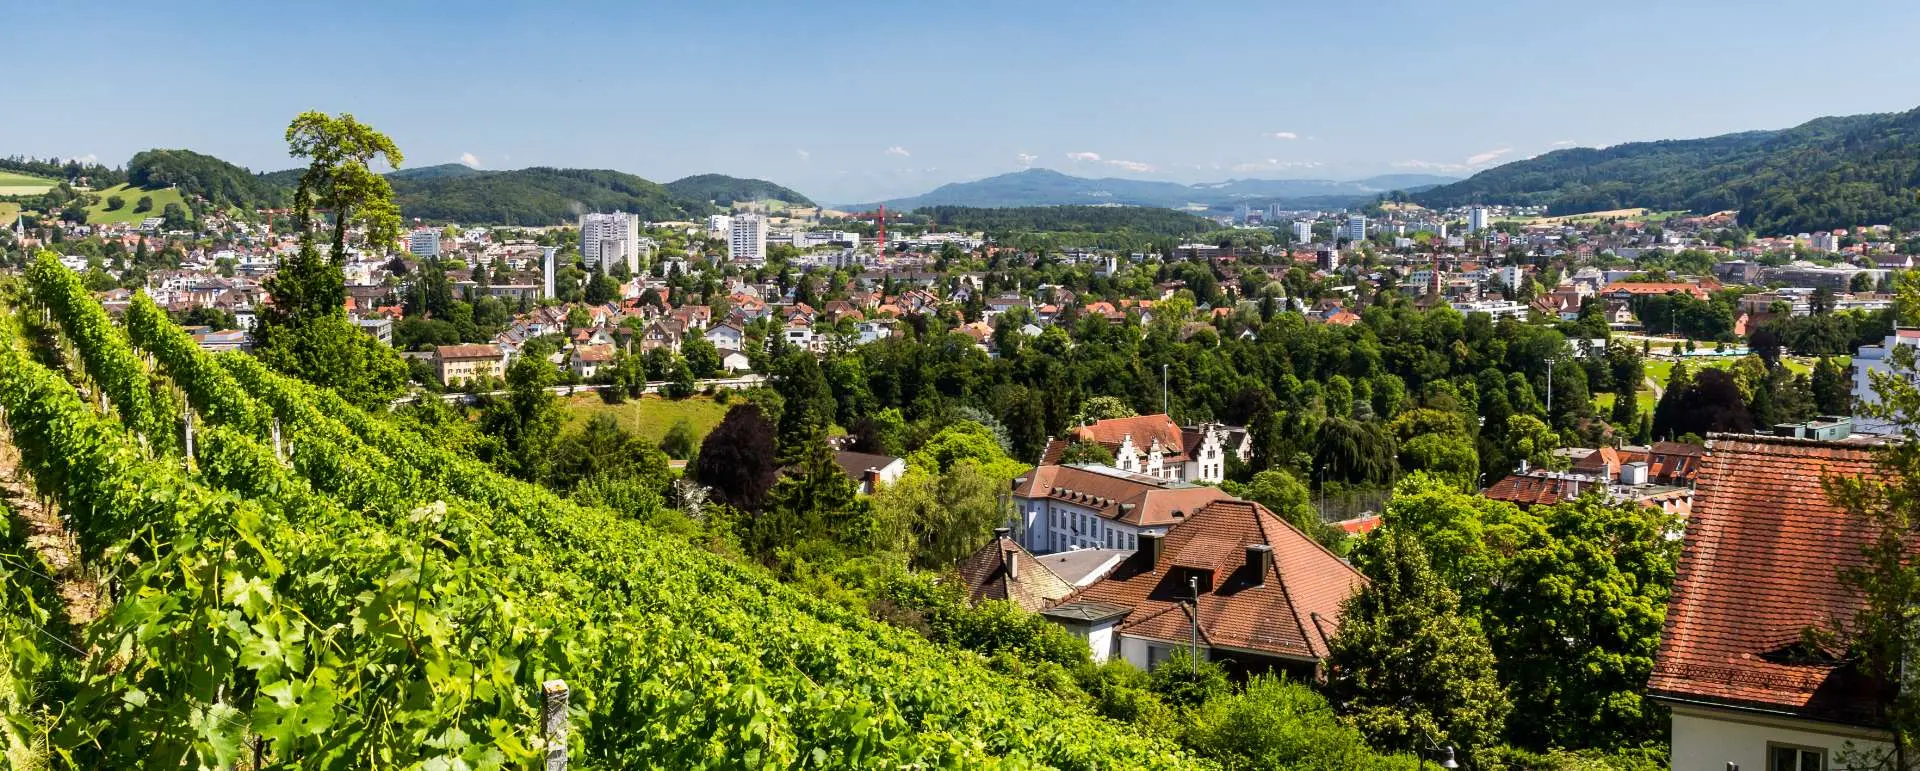 Aargau - the destination with disabled-friendly accommodations